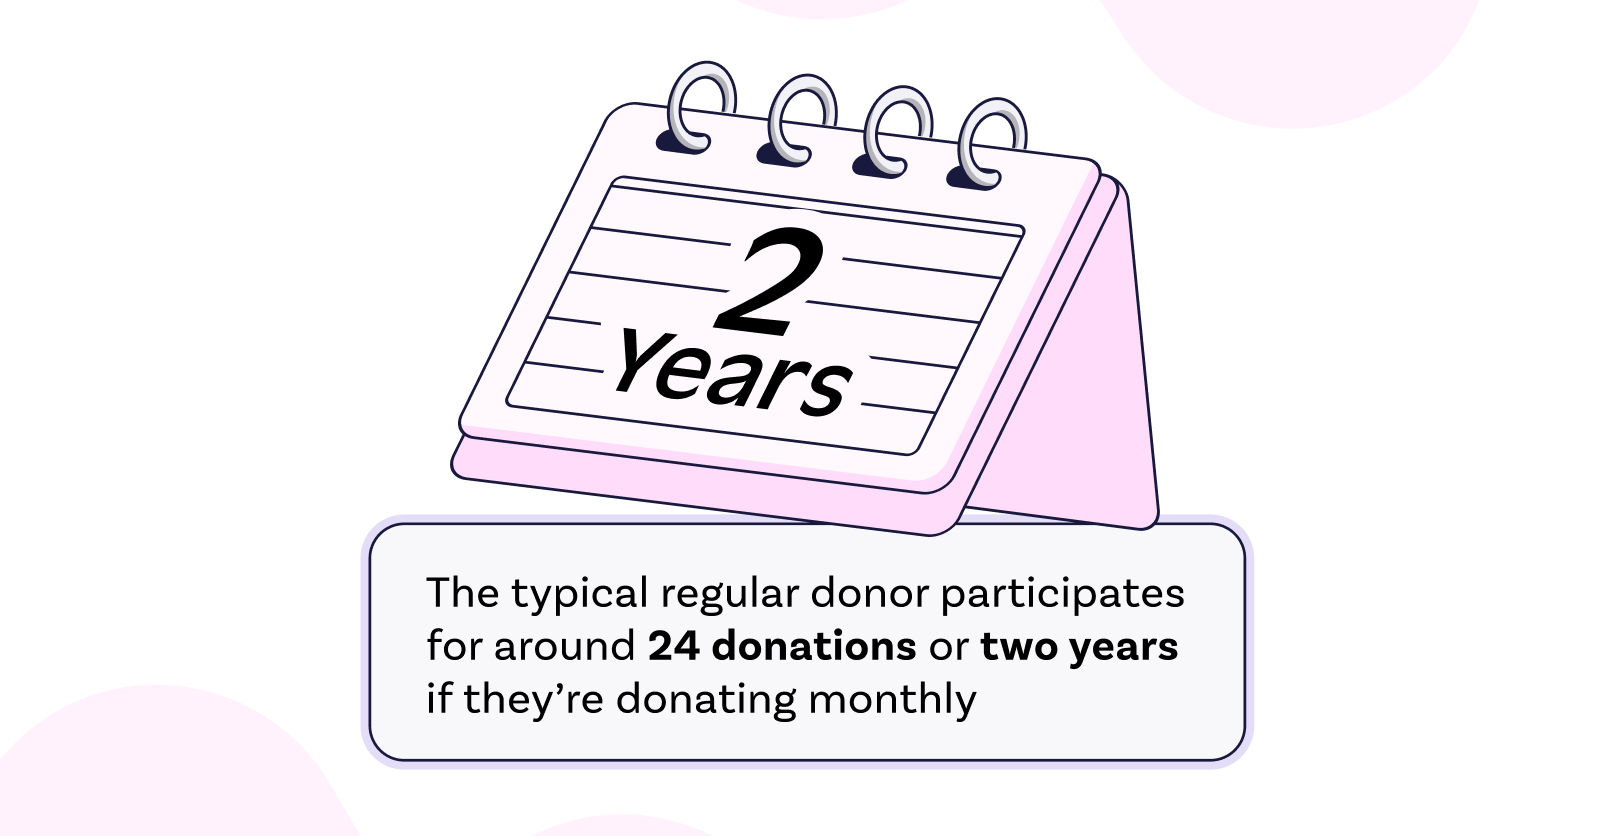 24 donations or two years if they’re donating monthly.